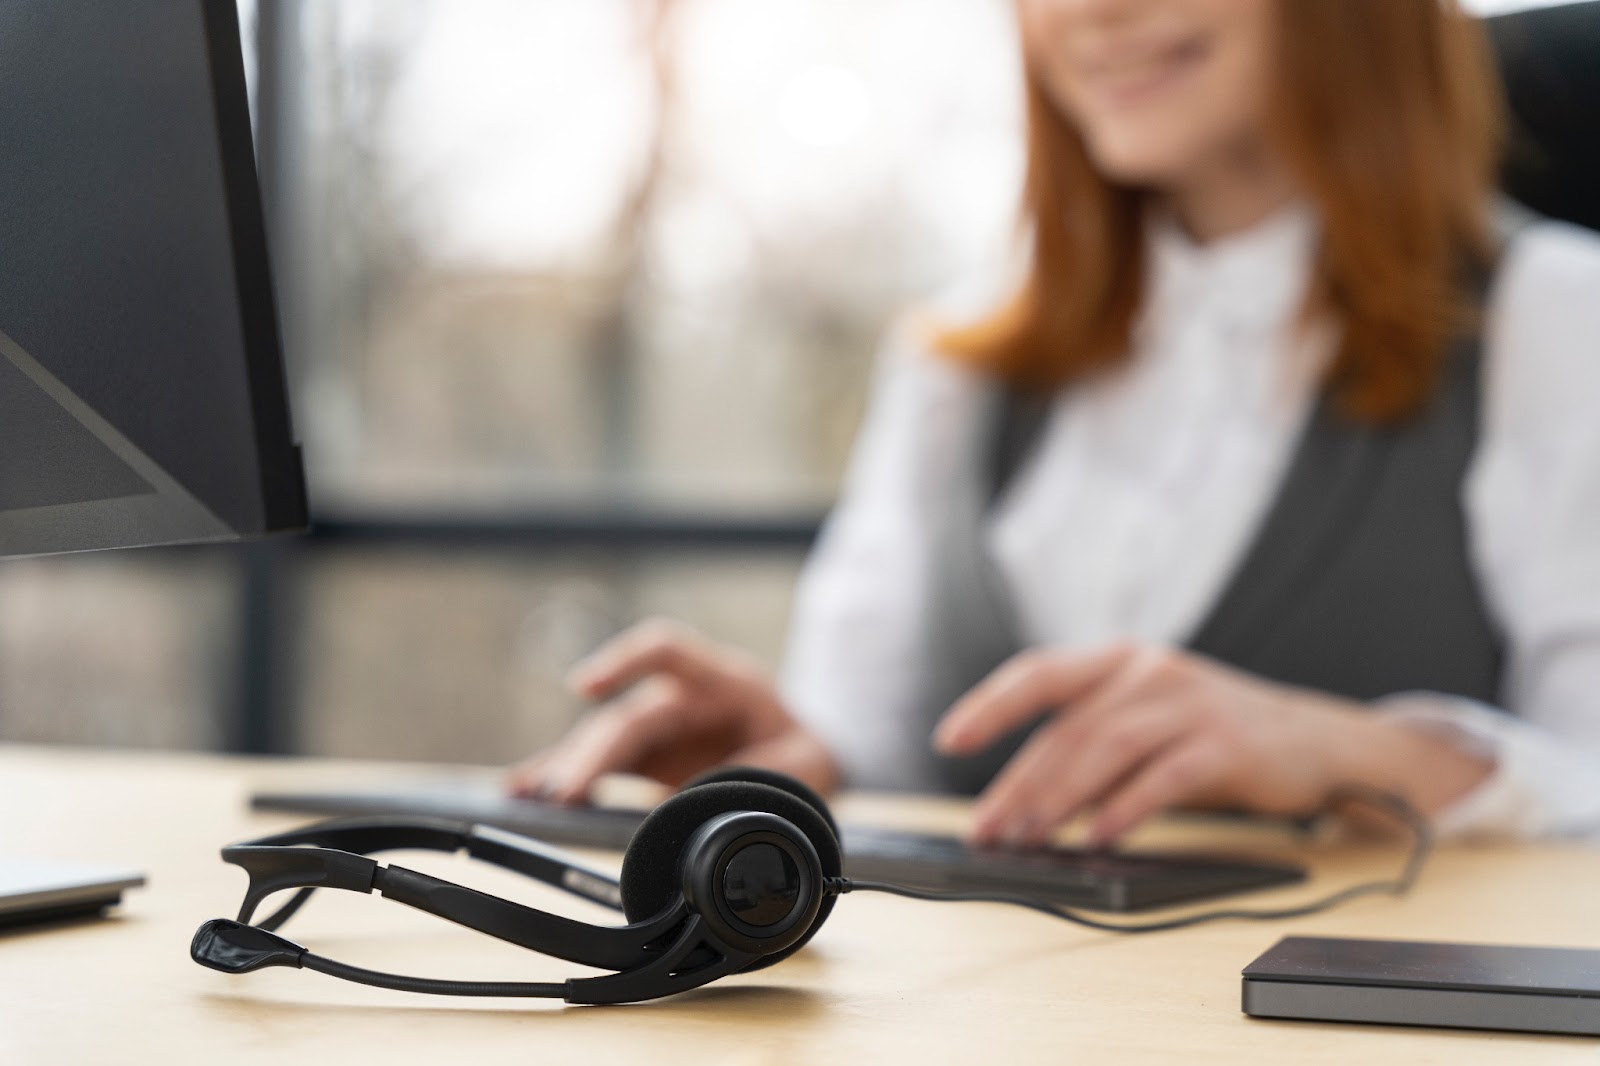 Изображение от <a href="https://ru.freepik.com/free-photo/woman-working-in-a-call-center-talking-with-clients-using-headphones-and-microphone_22196613.htm#page=4&query=%D0%BA%D0%BE%D0%BB%D0%BB%20%D1%86%D0%B5%D0%BD%D1%82%D1%80&position=27&from_view=search&track=ais&uuid=d85e31d6-5af2-45ed-bbf2-4b7636c8bc14#position=27&page=4&query=%D0%BA%D0%BE%D0%BB%D0%BB%20%D1%86%D0%B5%D0%BD%D1%82%D1%80">Freepik</a>